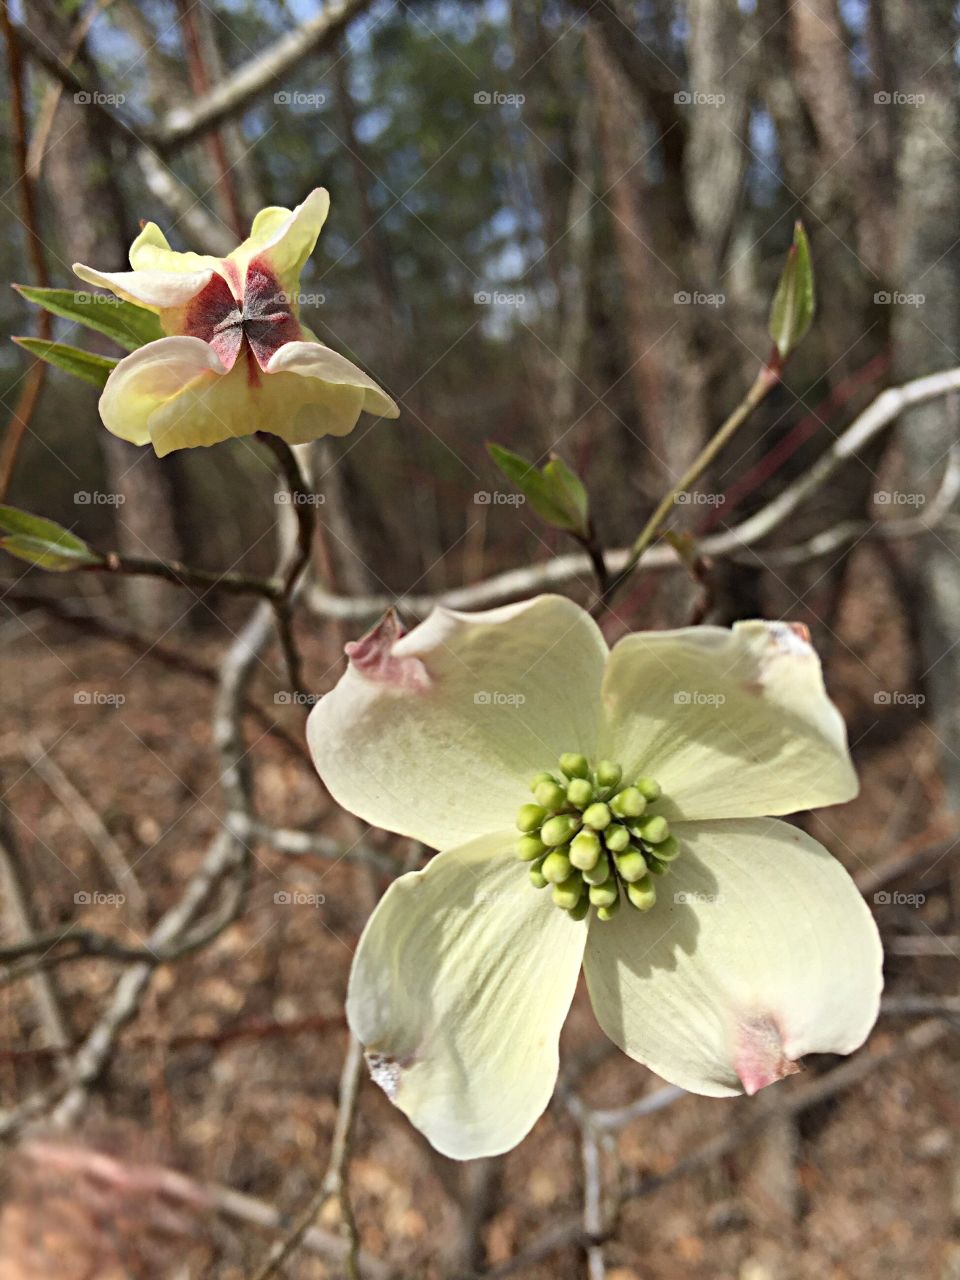 Dogwood flowers blooming outdoors